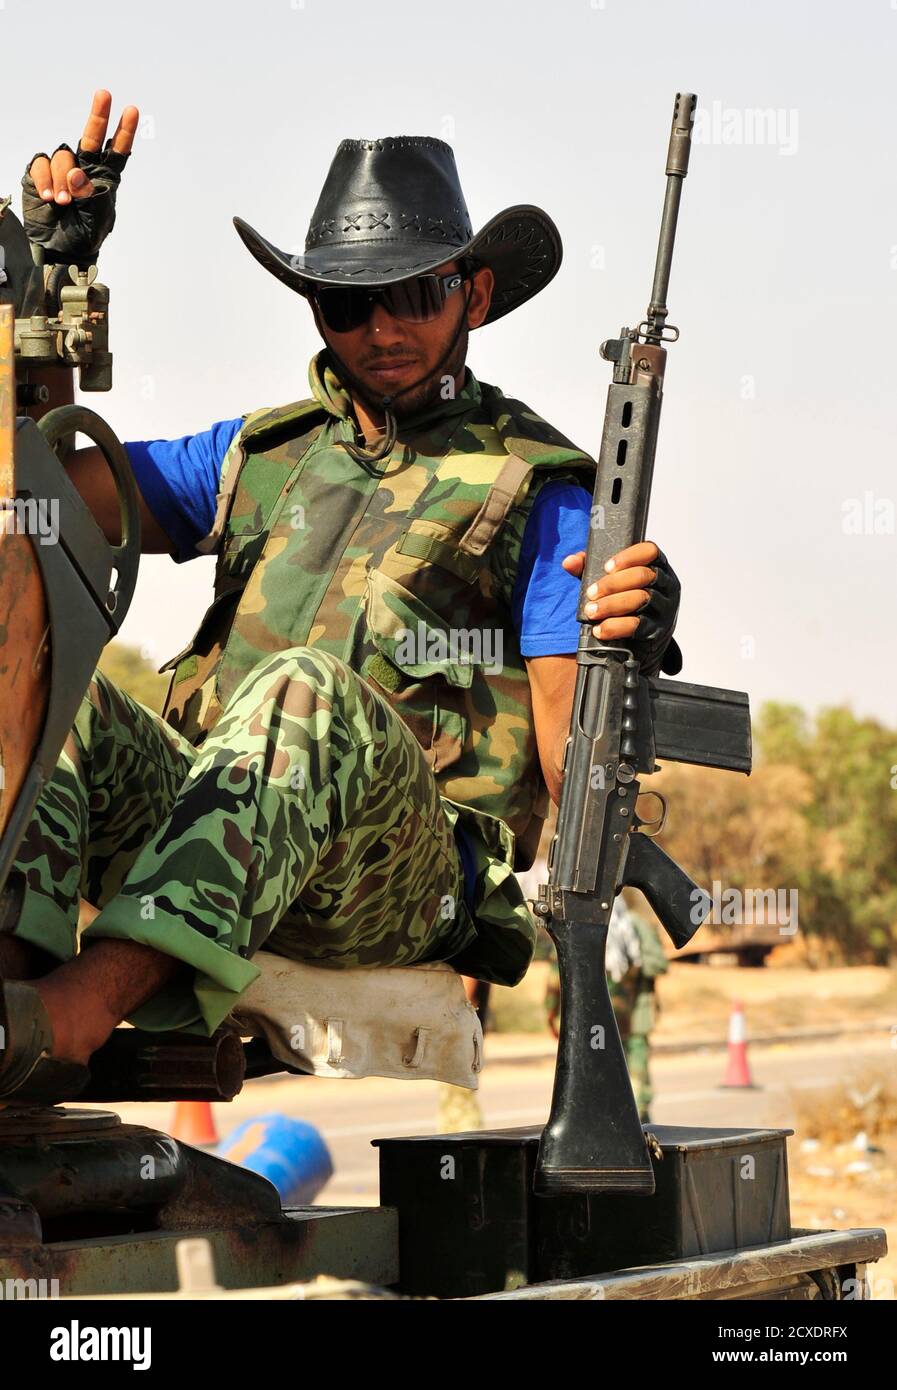 An anti-Gaddafi fighter holding his gun flashes the victory sign with his fingers at Khamseen Gate, 50 km east of Sirte September 25, 2011. Libyan interim government forces backed by NATO warplanes have mounted their deepest thrust into Muammar Gaddafi's home town of Sirte, getting as close as half a kilometre from the centre of the deposed leader's coastal stronghold. REUTERS/Esam Al-Fetori (LIBYA - Tags: POLITICS CIVIL UNREST CONFLICT) Stock Photo